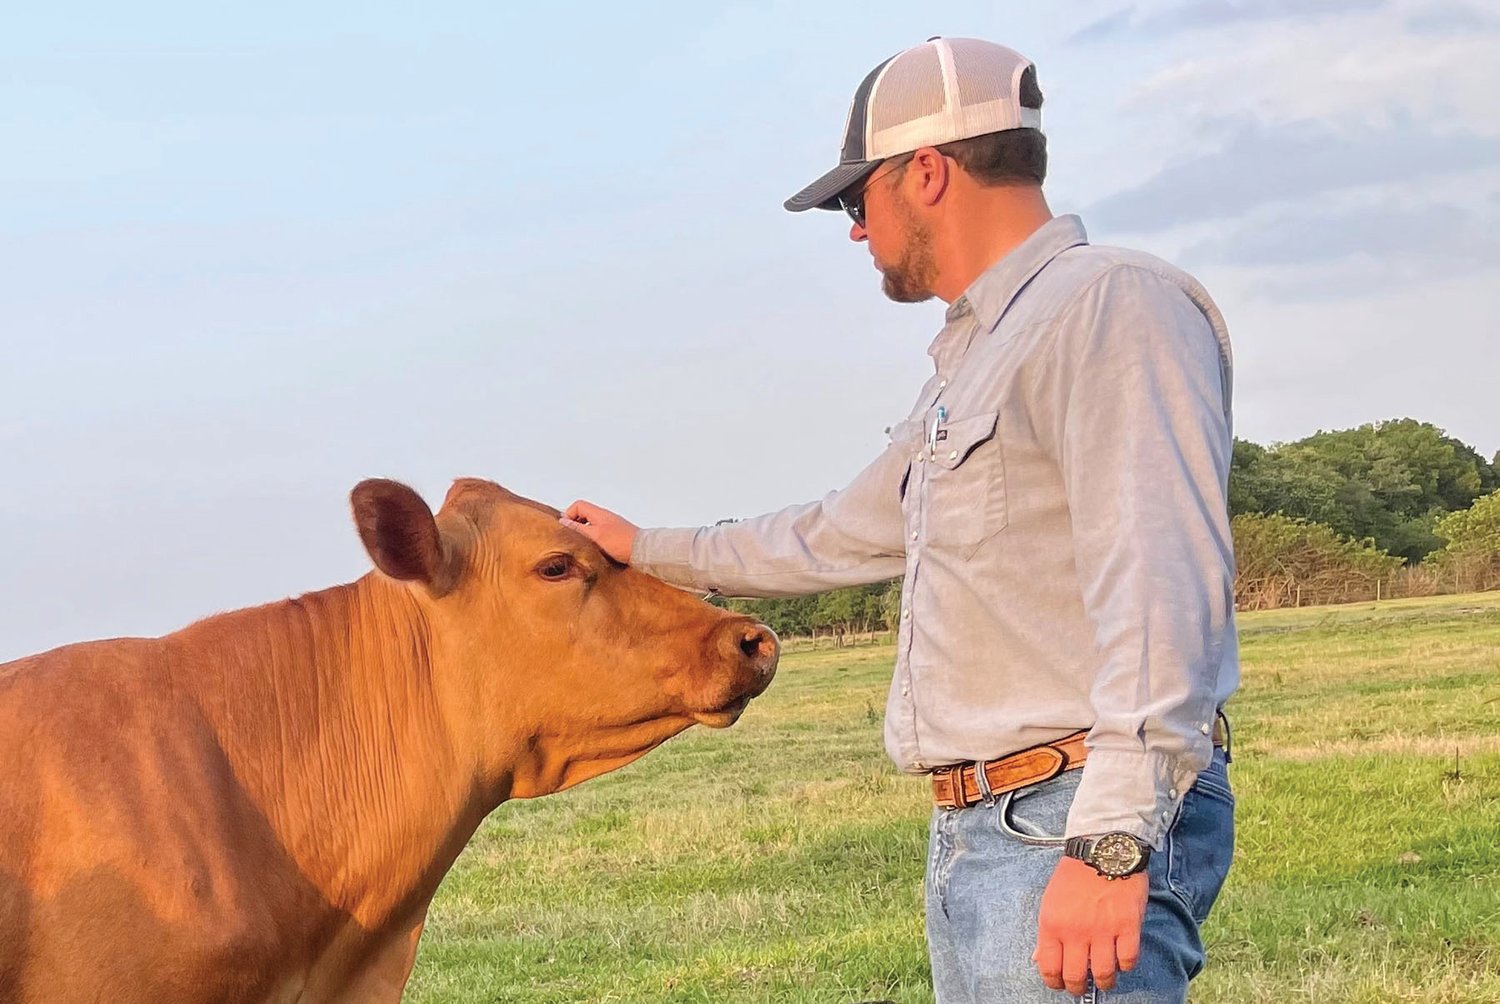 Kaylan Royal developed a passion for the agriculture industry at a young age, helping with his family's commercial cow-calf operation in Wauchula.